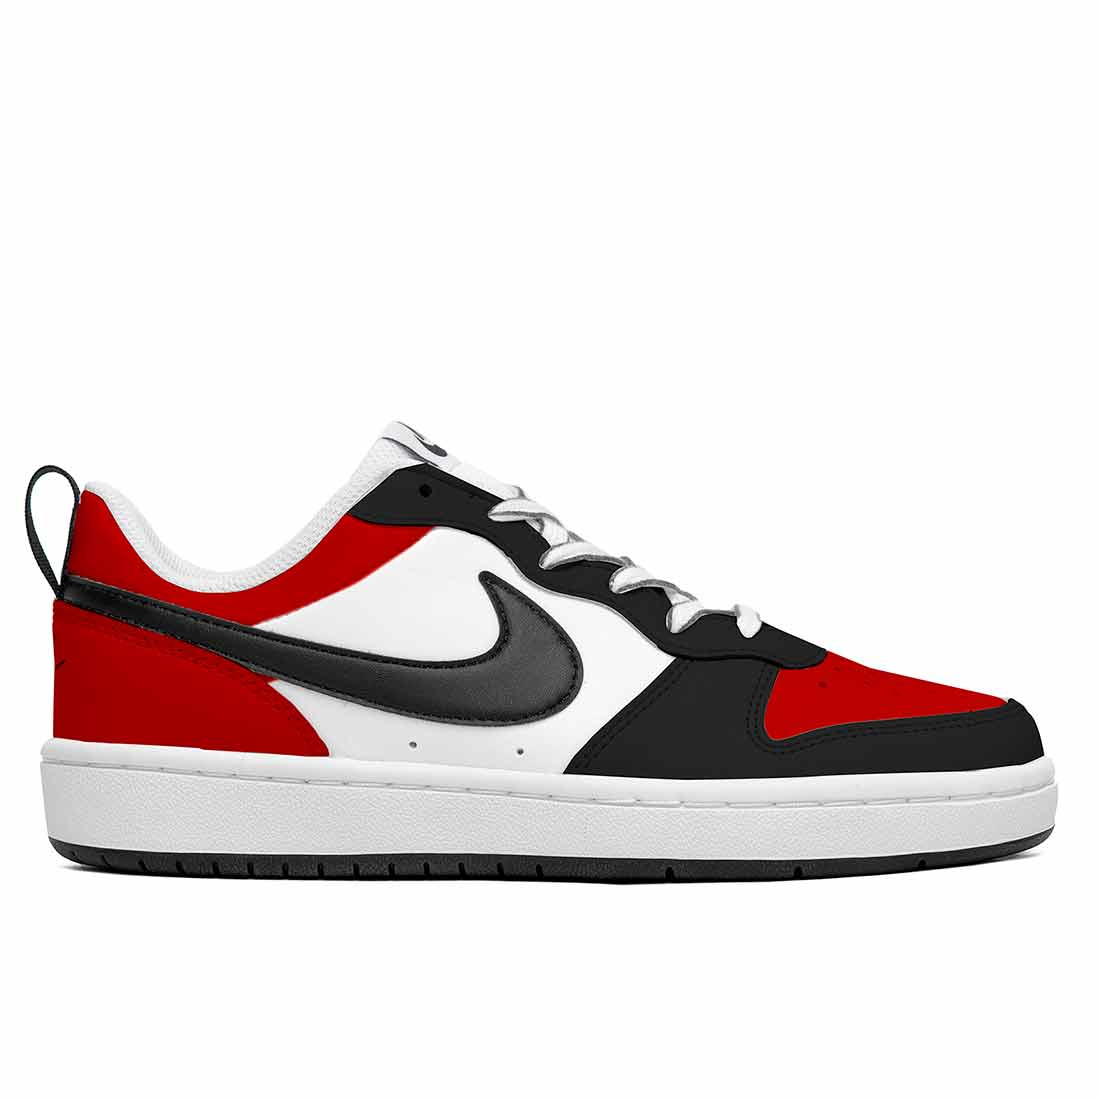 nike court bianche nere e rosse chicago